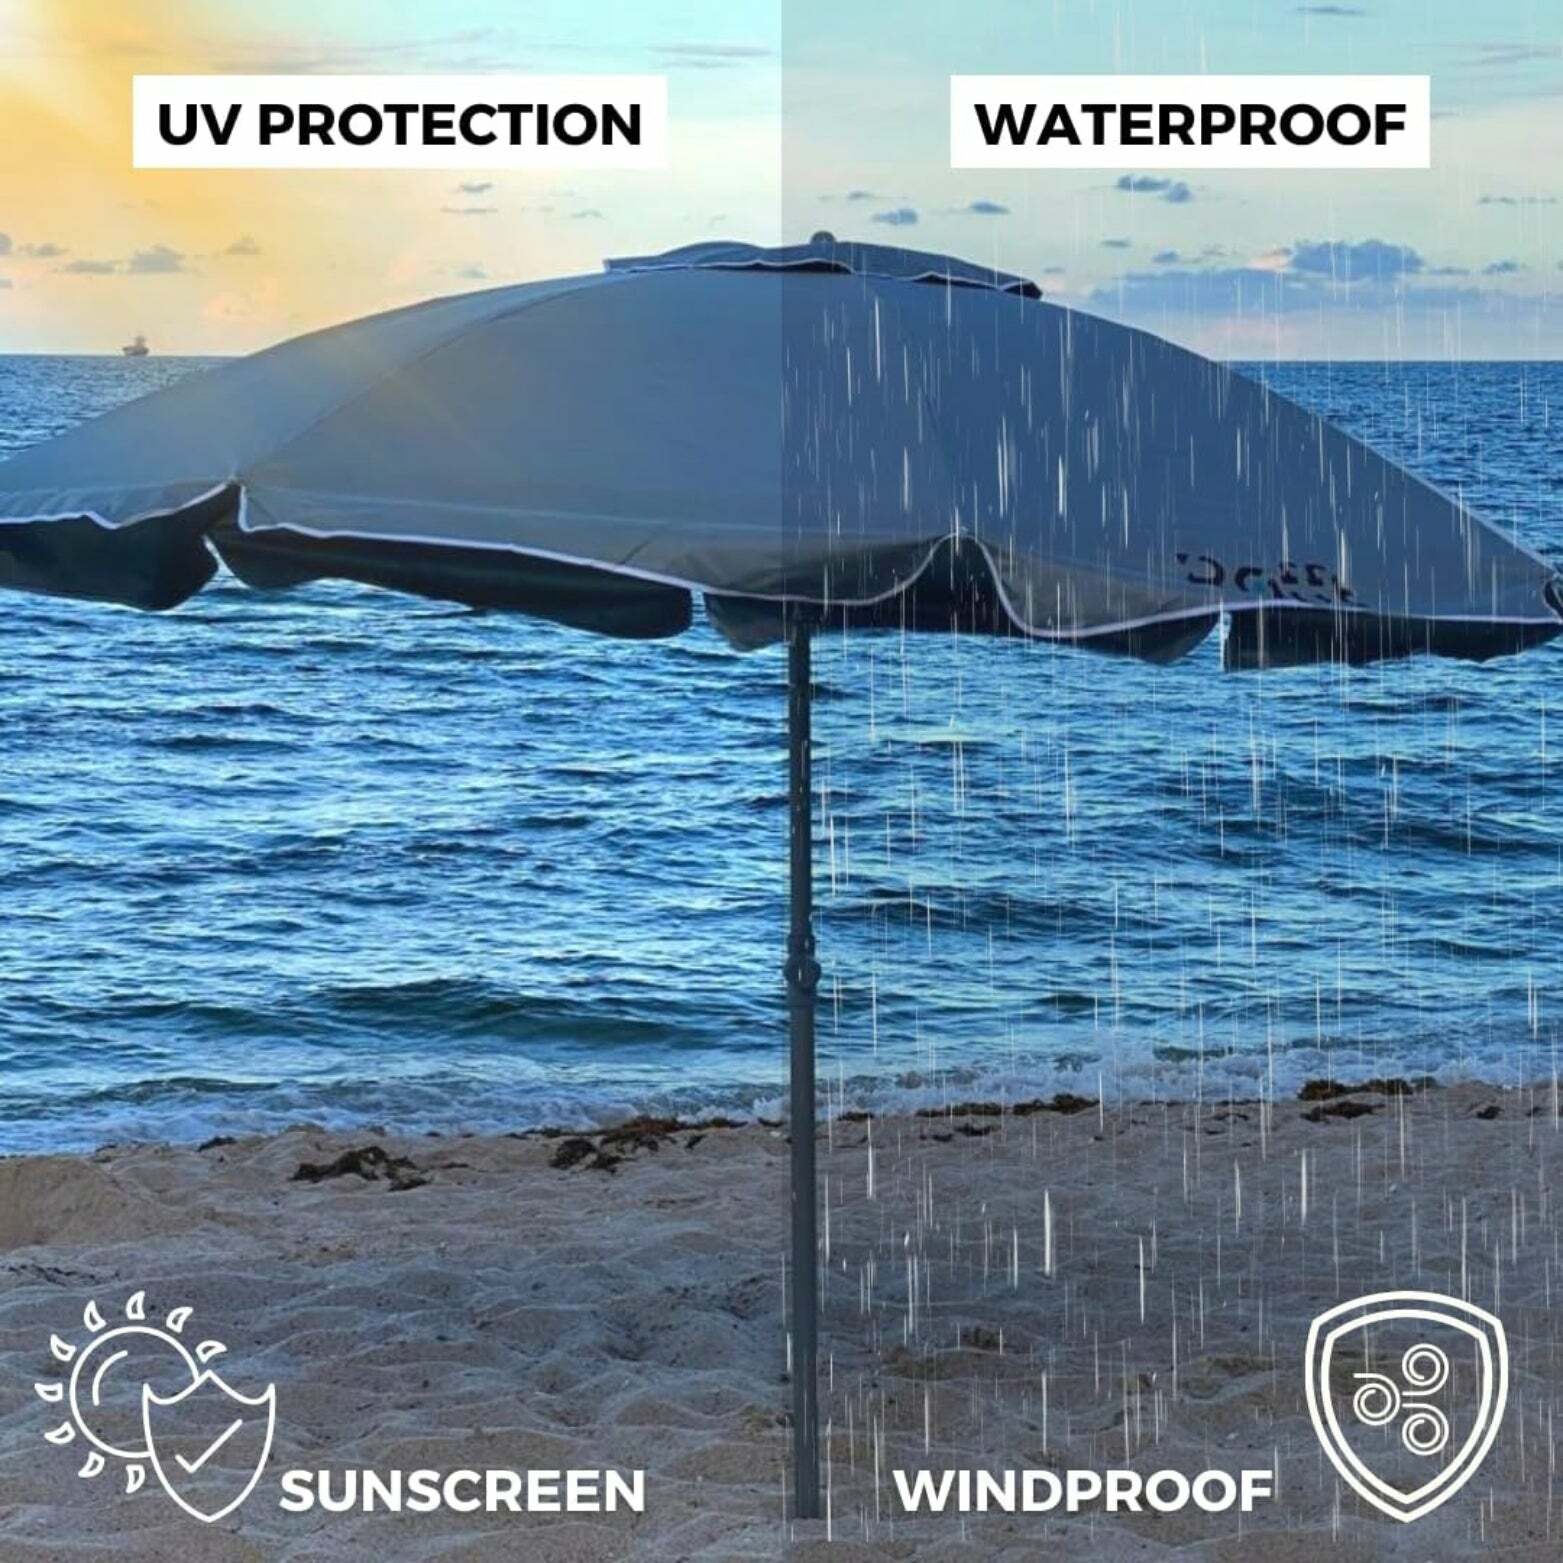 ROFFT Sturdy Beach Umbrella with UV Protection and Windproof Design - 7.8 Ft Coverage, Steel & Aluminum Pole, Tilt Adjustment- Gray